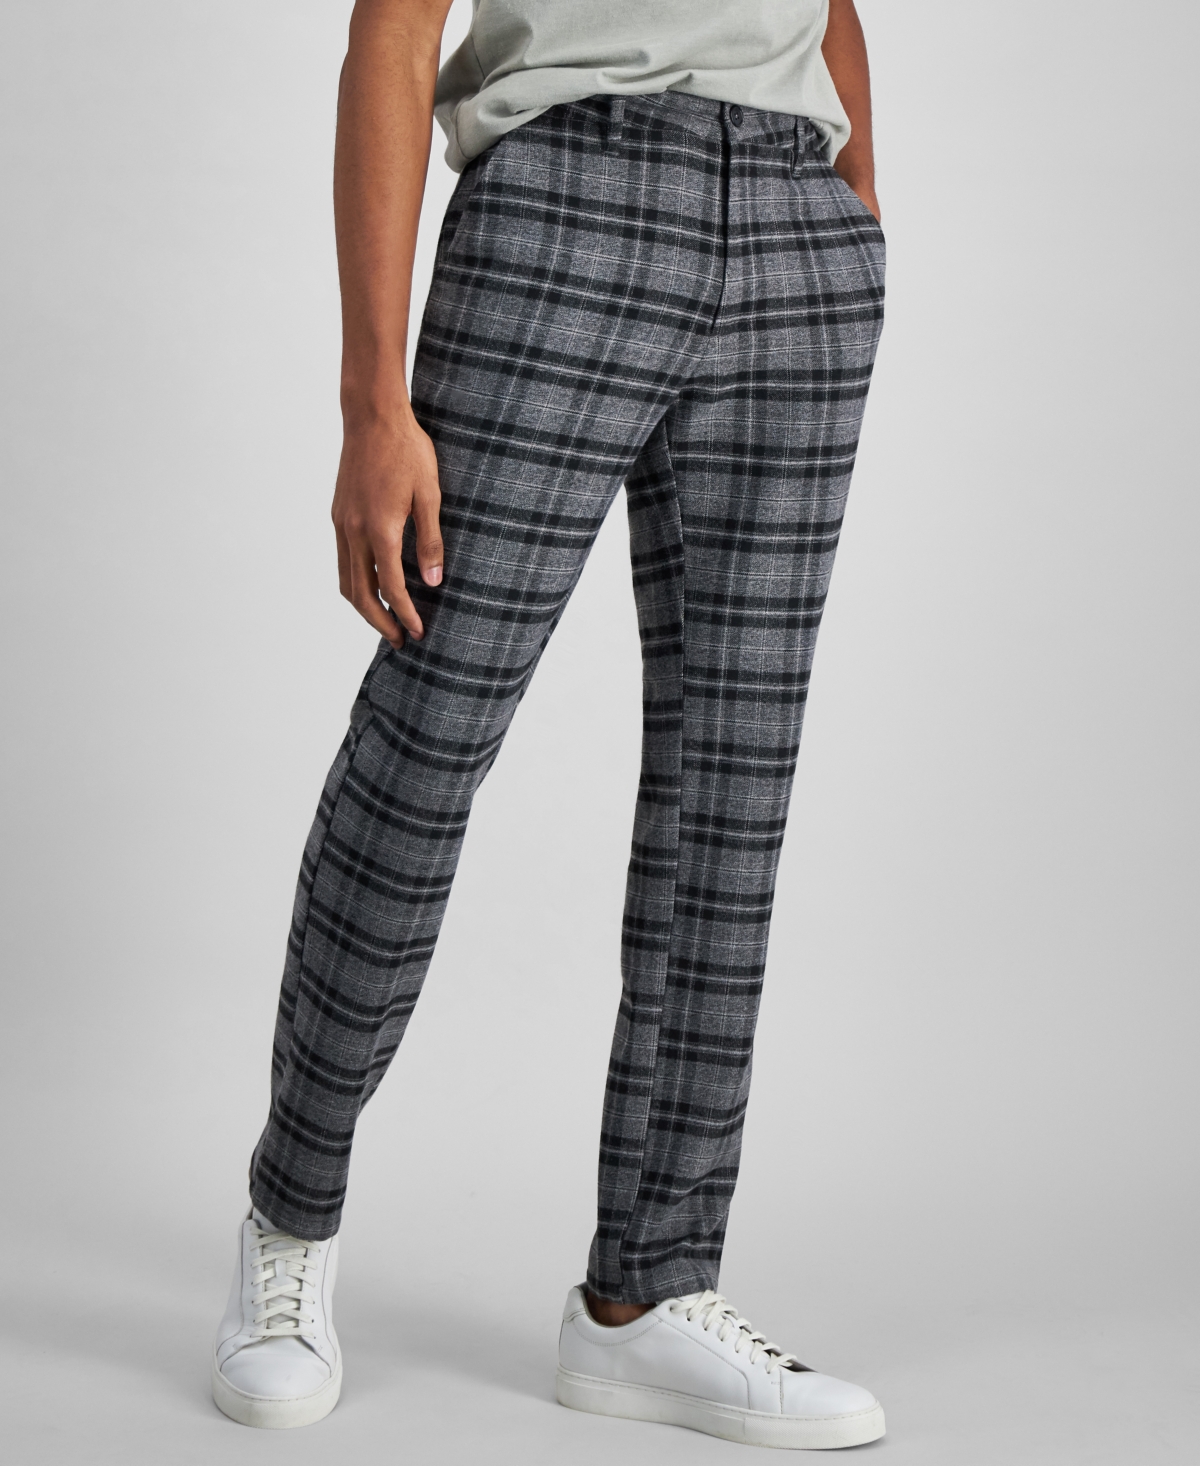 UPC 194949543596 - And Now This Men's Plaid Flannel Chino Pants ...